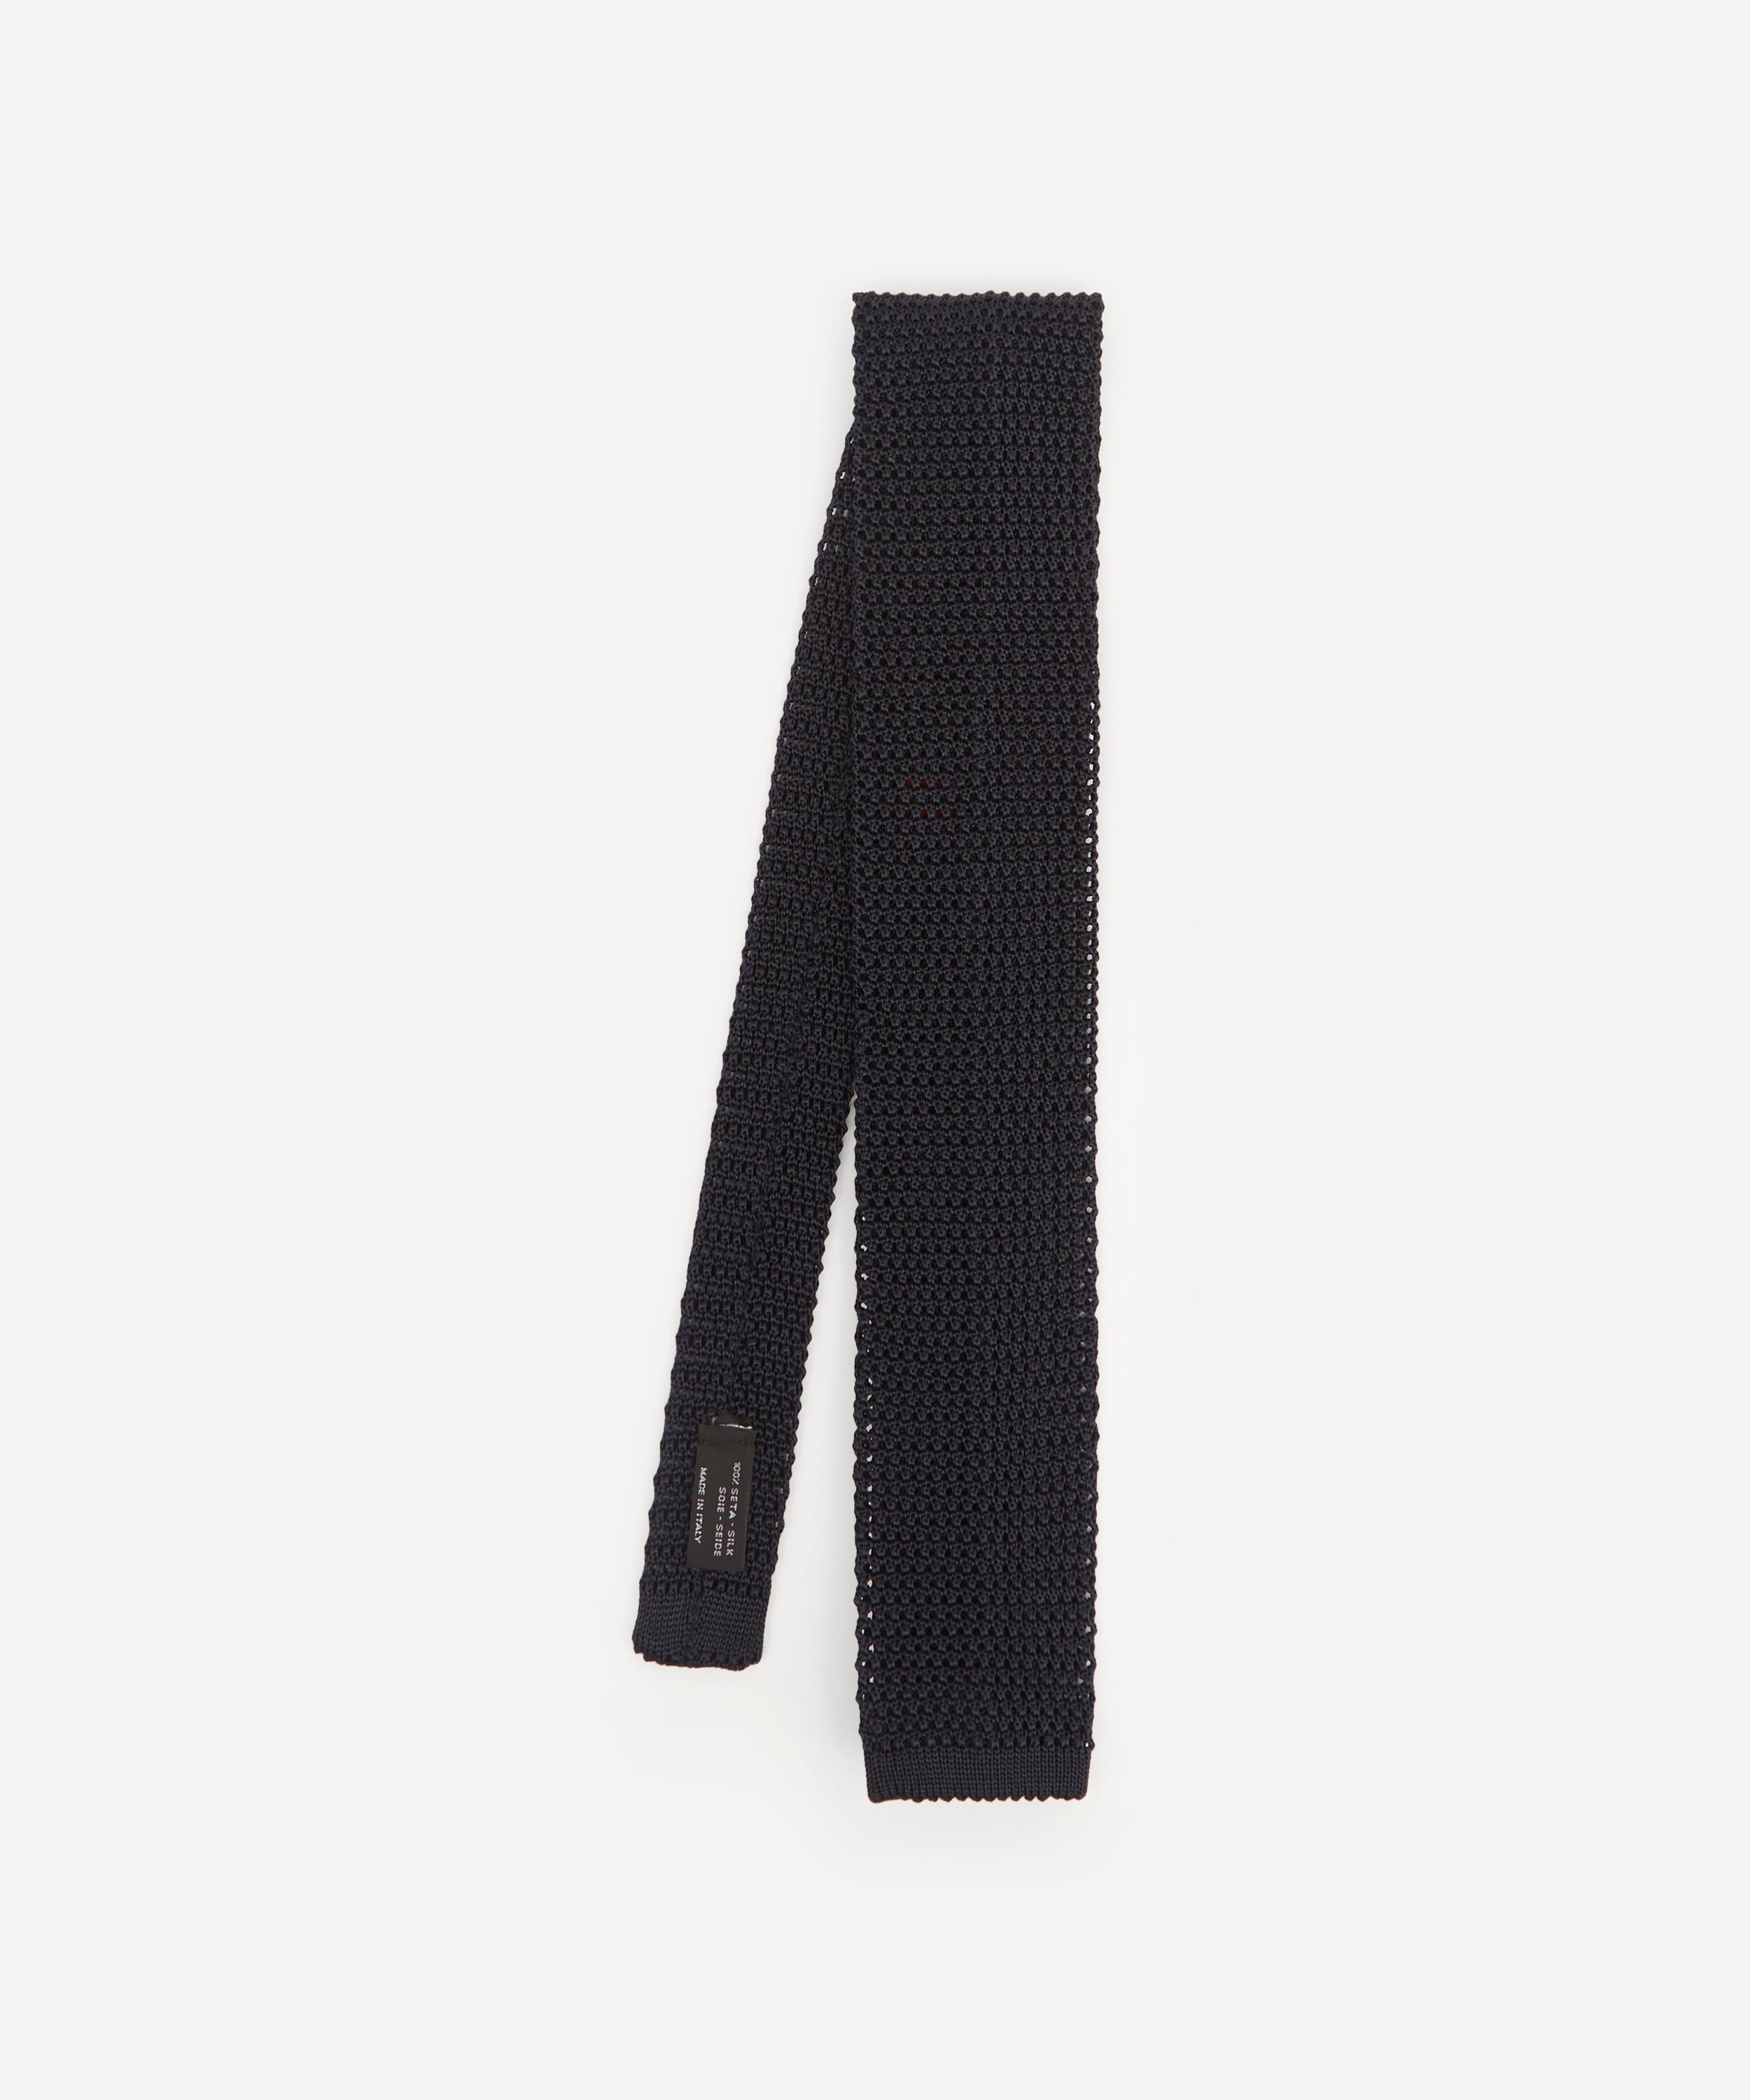 nick bronson knitted tie